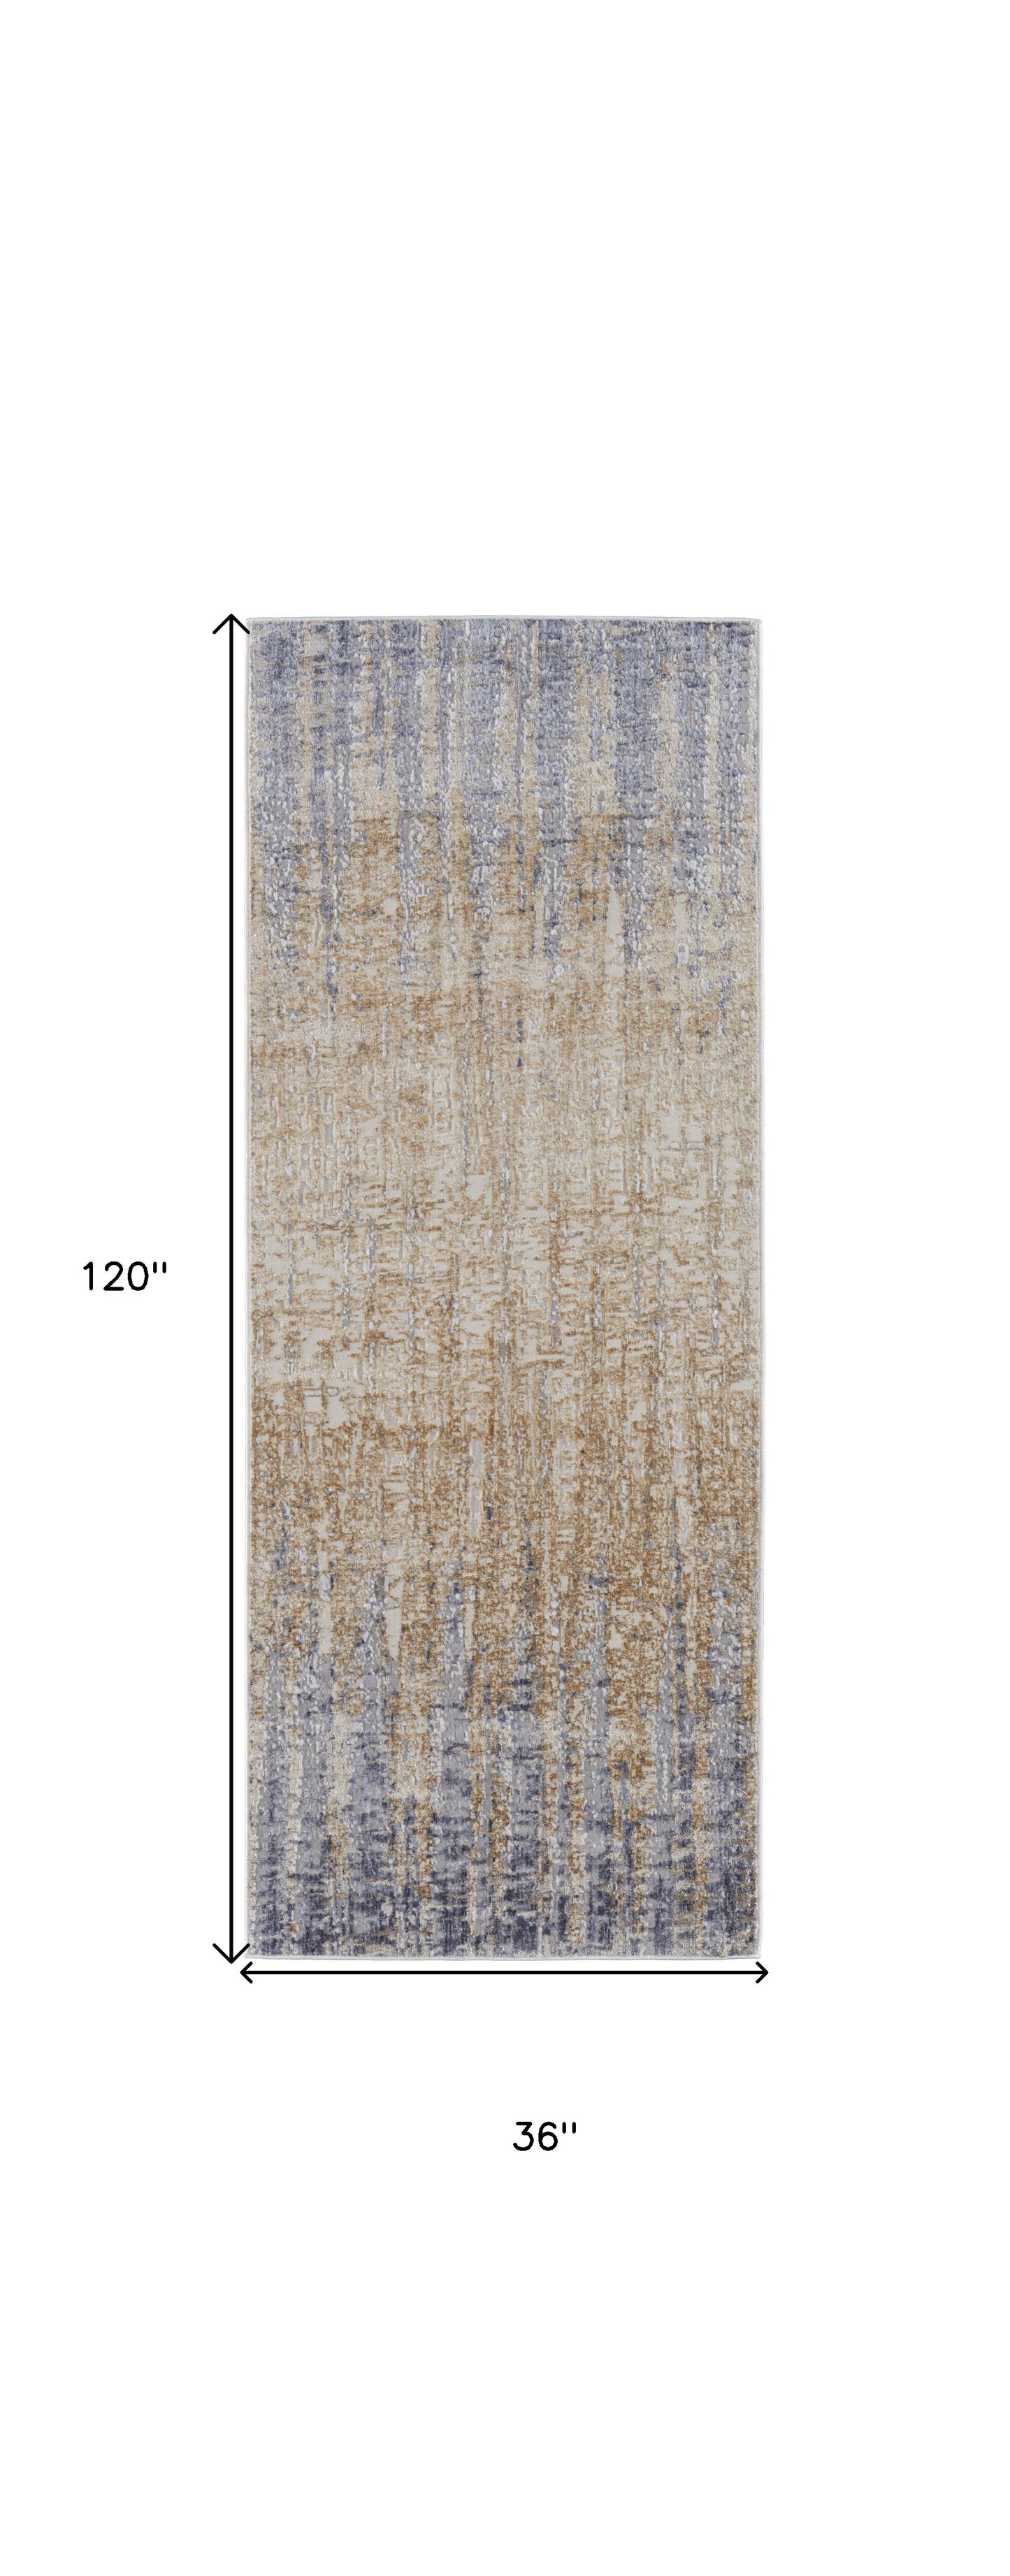 8' X 10' Tan Brown And Blue Abstract Power Loom Distressed Area Rug